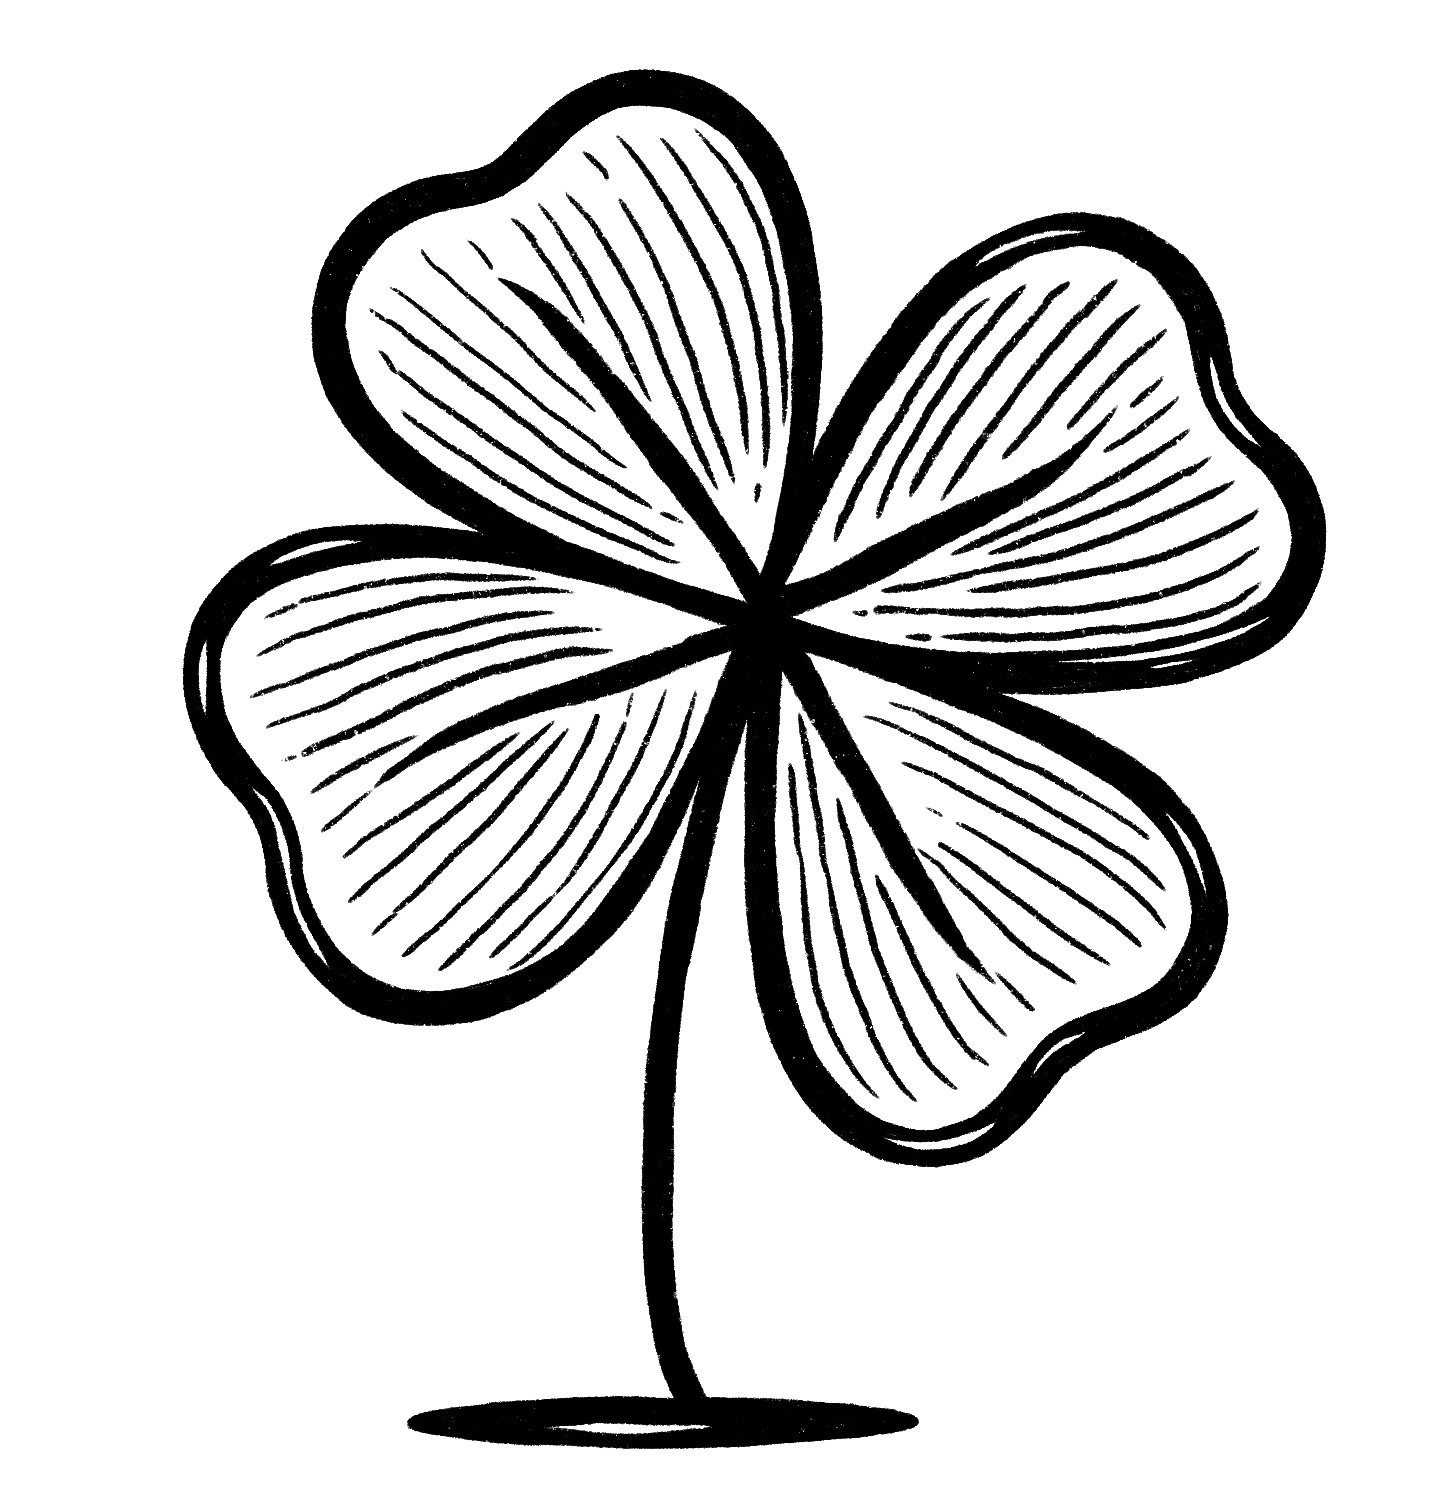 4 Leaf Clover Drawing Lesson Step4 GraphicsFairy 